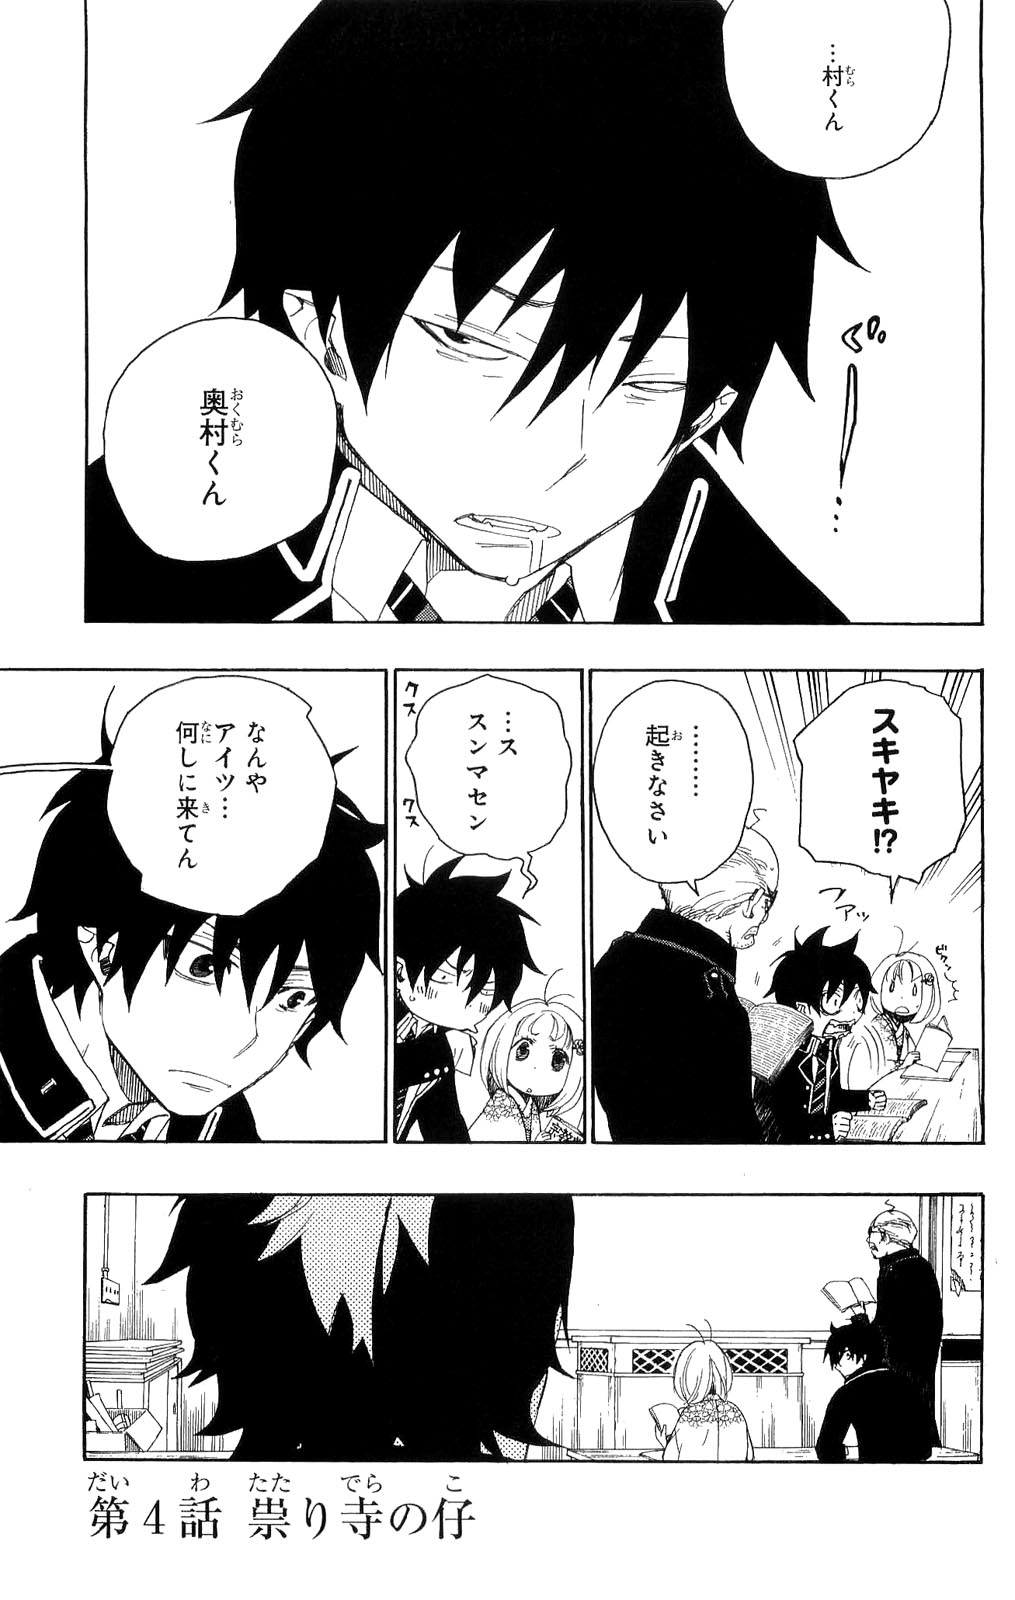 Ao no Exorcist - Chapter 4 - Page 1